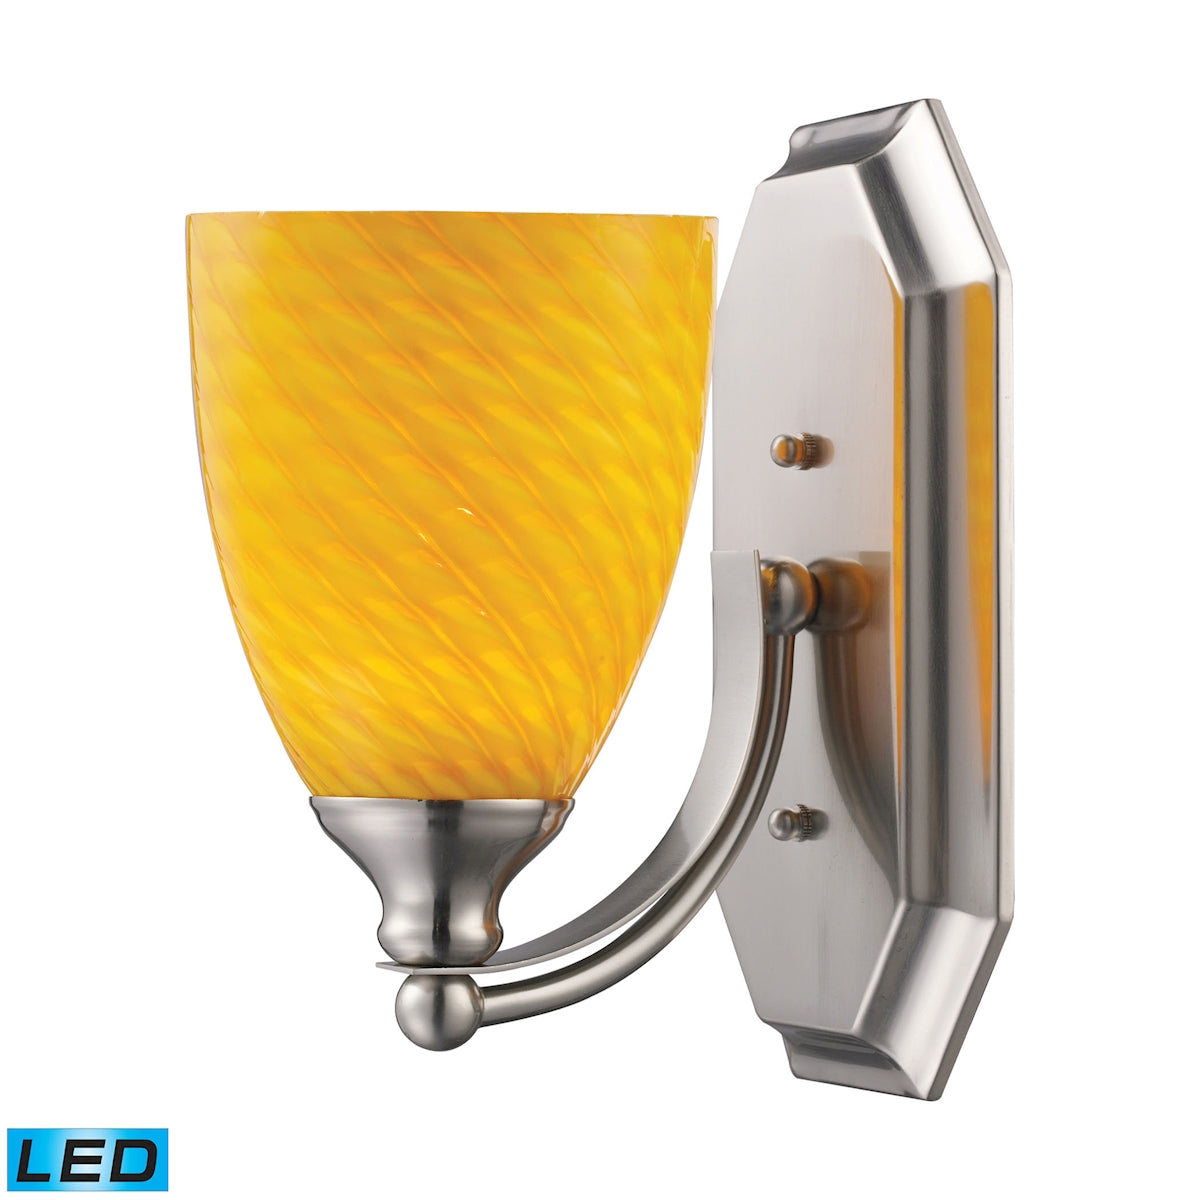 ELK Lighting 570-1N-CN-LED Mix-N-Match Vanity 1-Light Wall Lamp in Satin Nickel with Canary Glass - Includes LED Bulb